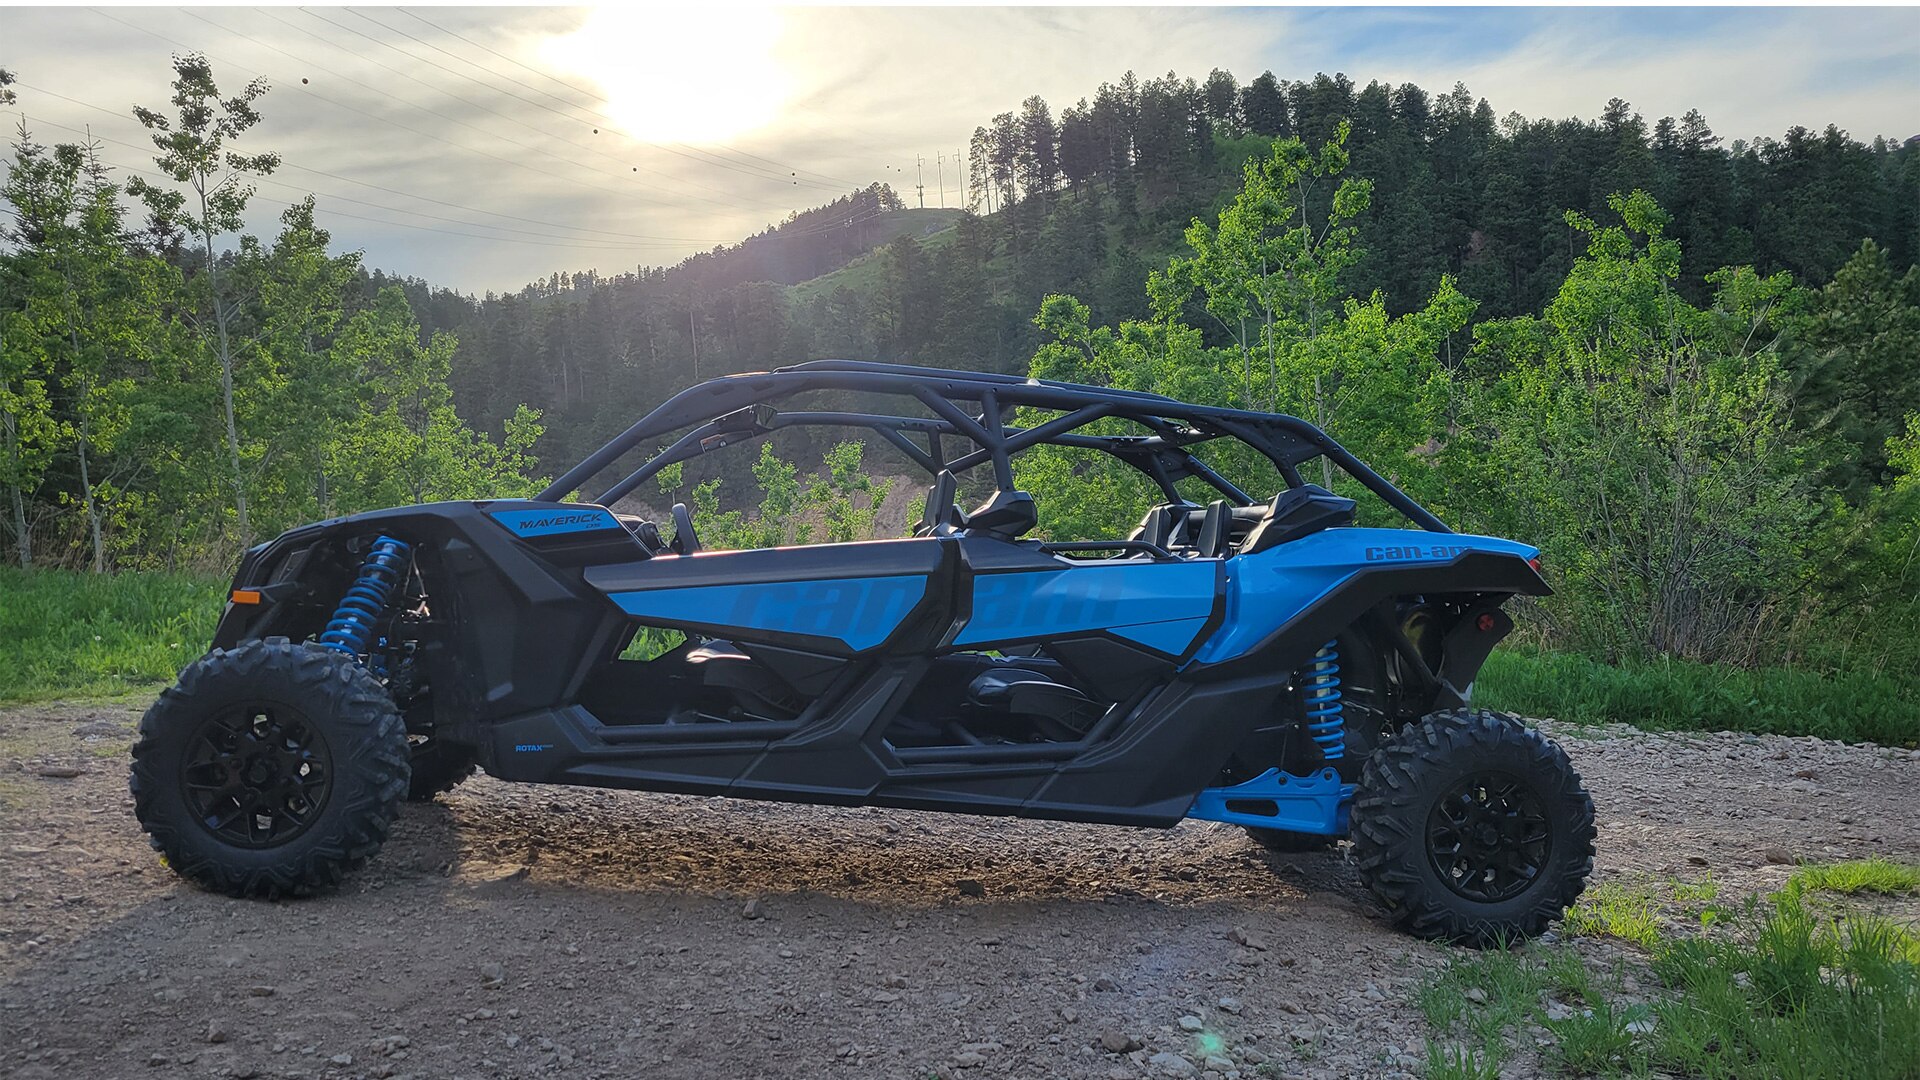 A side view of the Can-Am Maverick X3